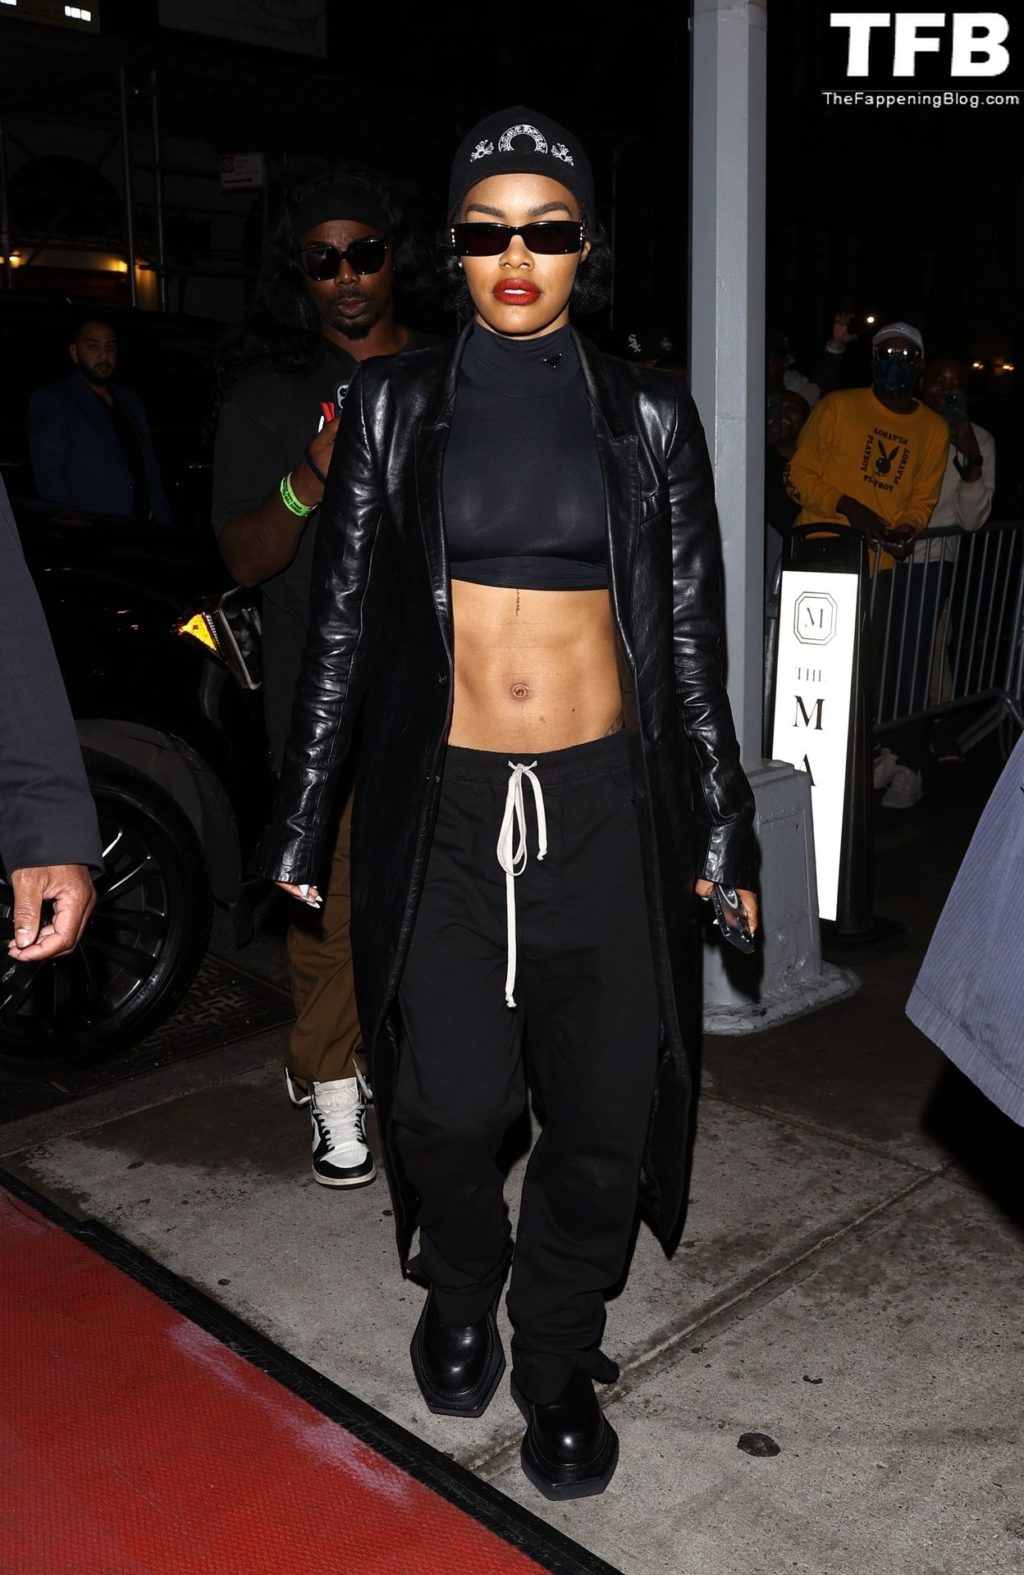 Teyana Taylor Sexy The Fappening Blog 2 1024x1575 - Teyana Taylor Shows Off Her Tits & 6 Pack as She Arrives at Her Hotel in NYC (17 Photos)